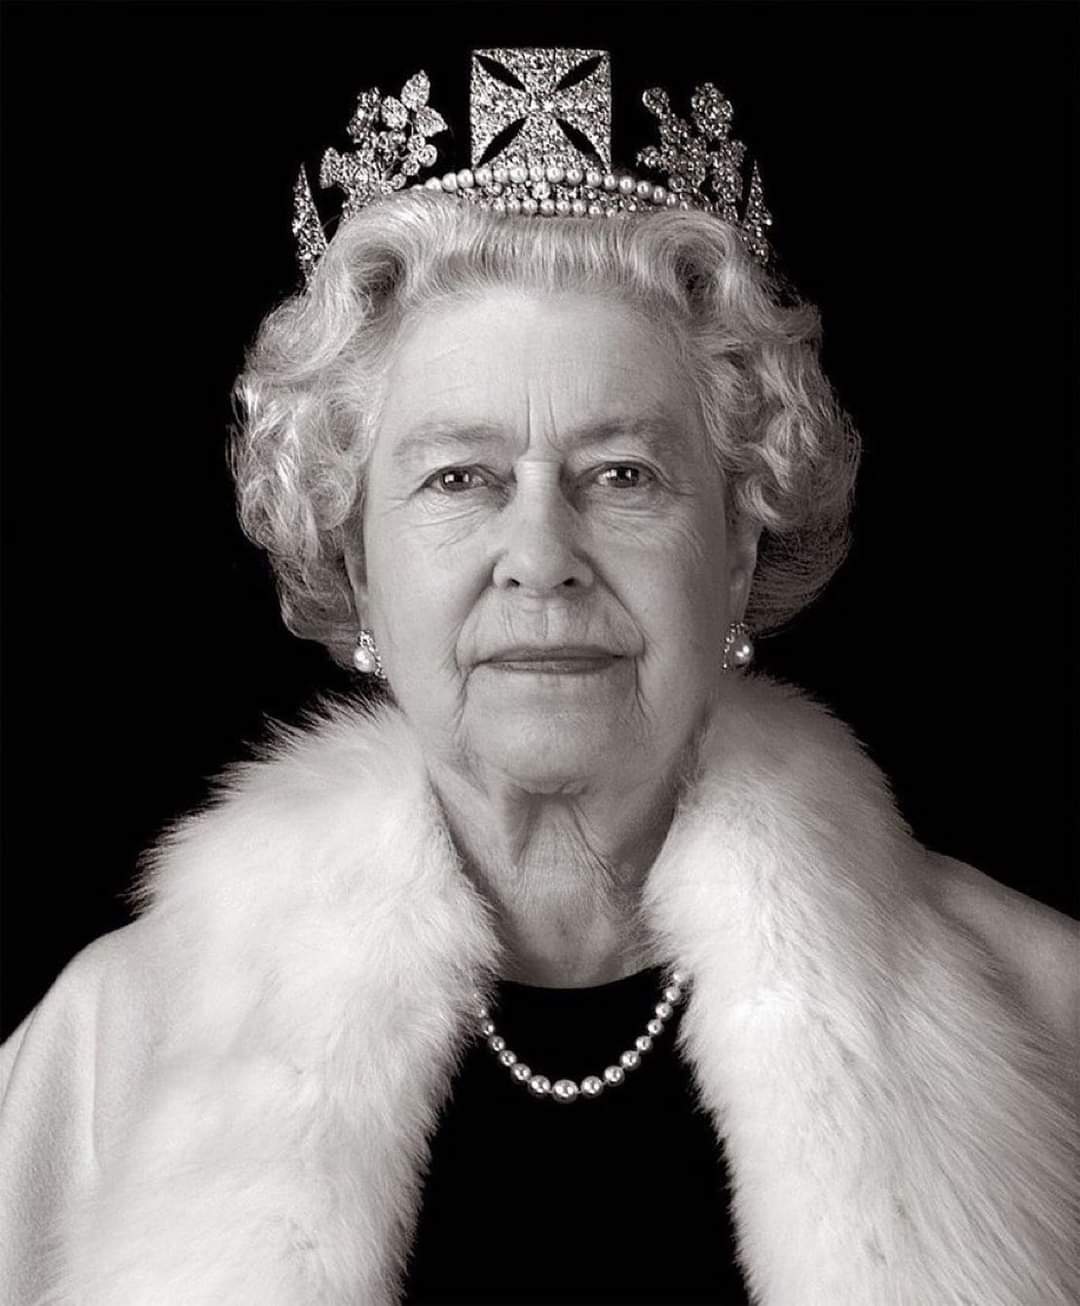 Advocate Agency pay its respects to Her Majesty, The Queen